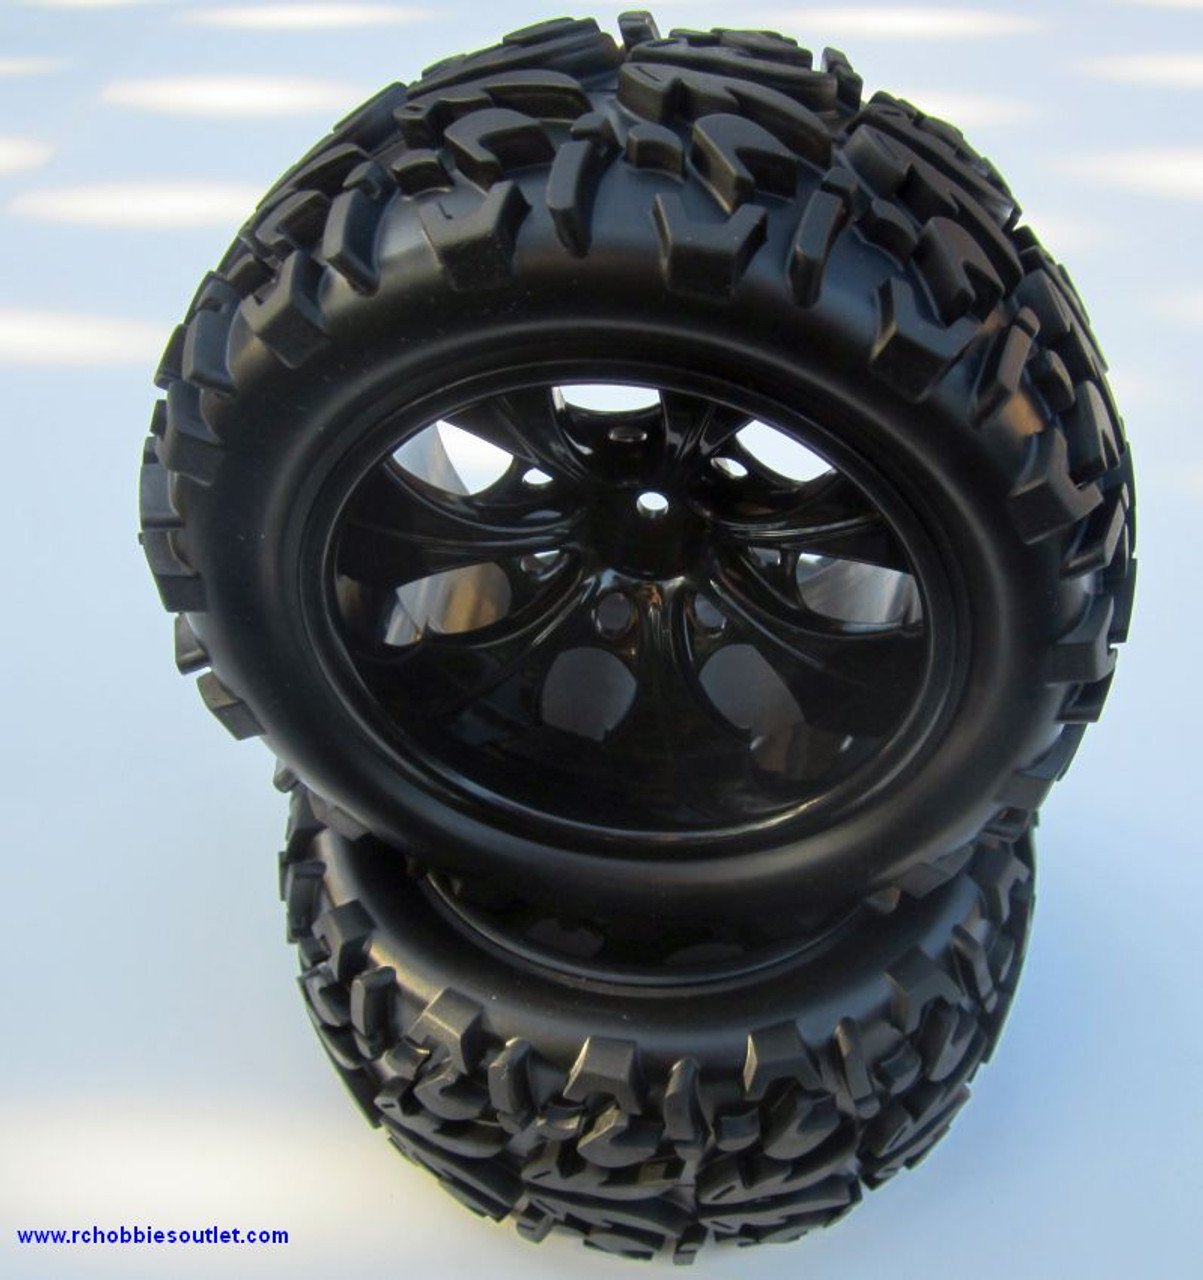 20126 1/10 Monster Truck Wheel, Tire and Black Rim Complete ( 2 PC) 08010